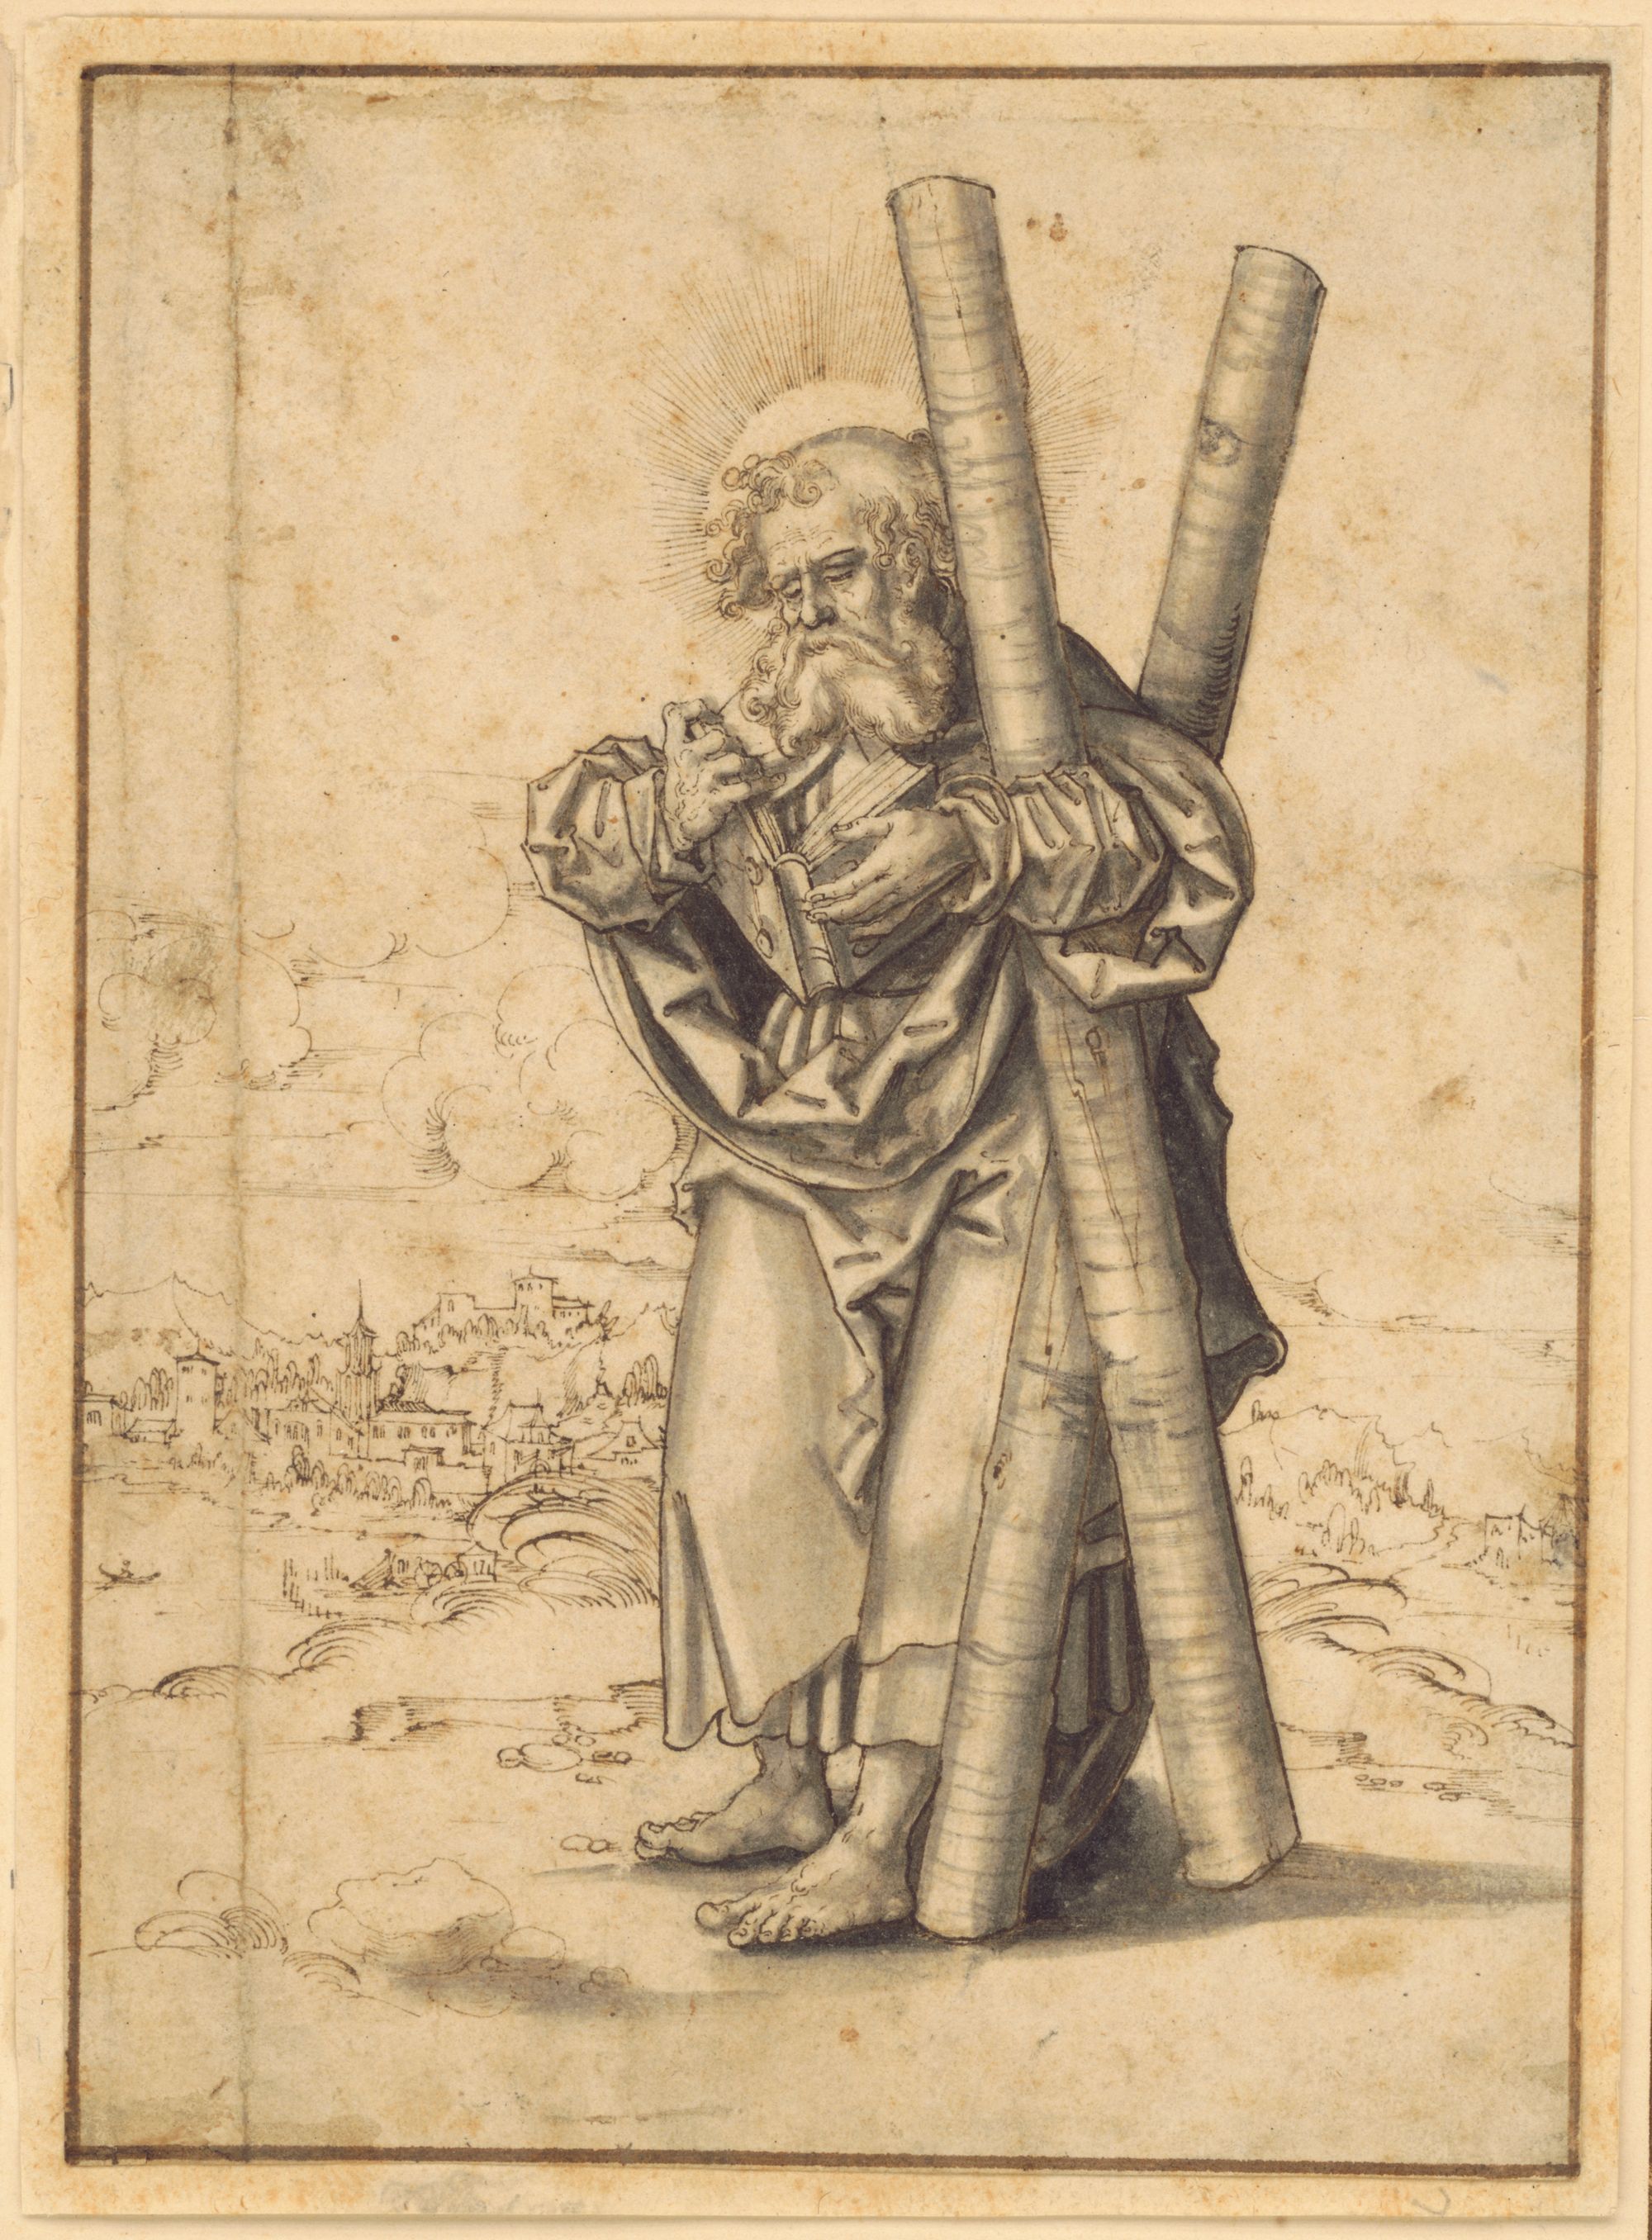 Saint Andrew by Master H.B. (about 1530) - Public Domain Catholic Drawing